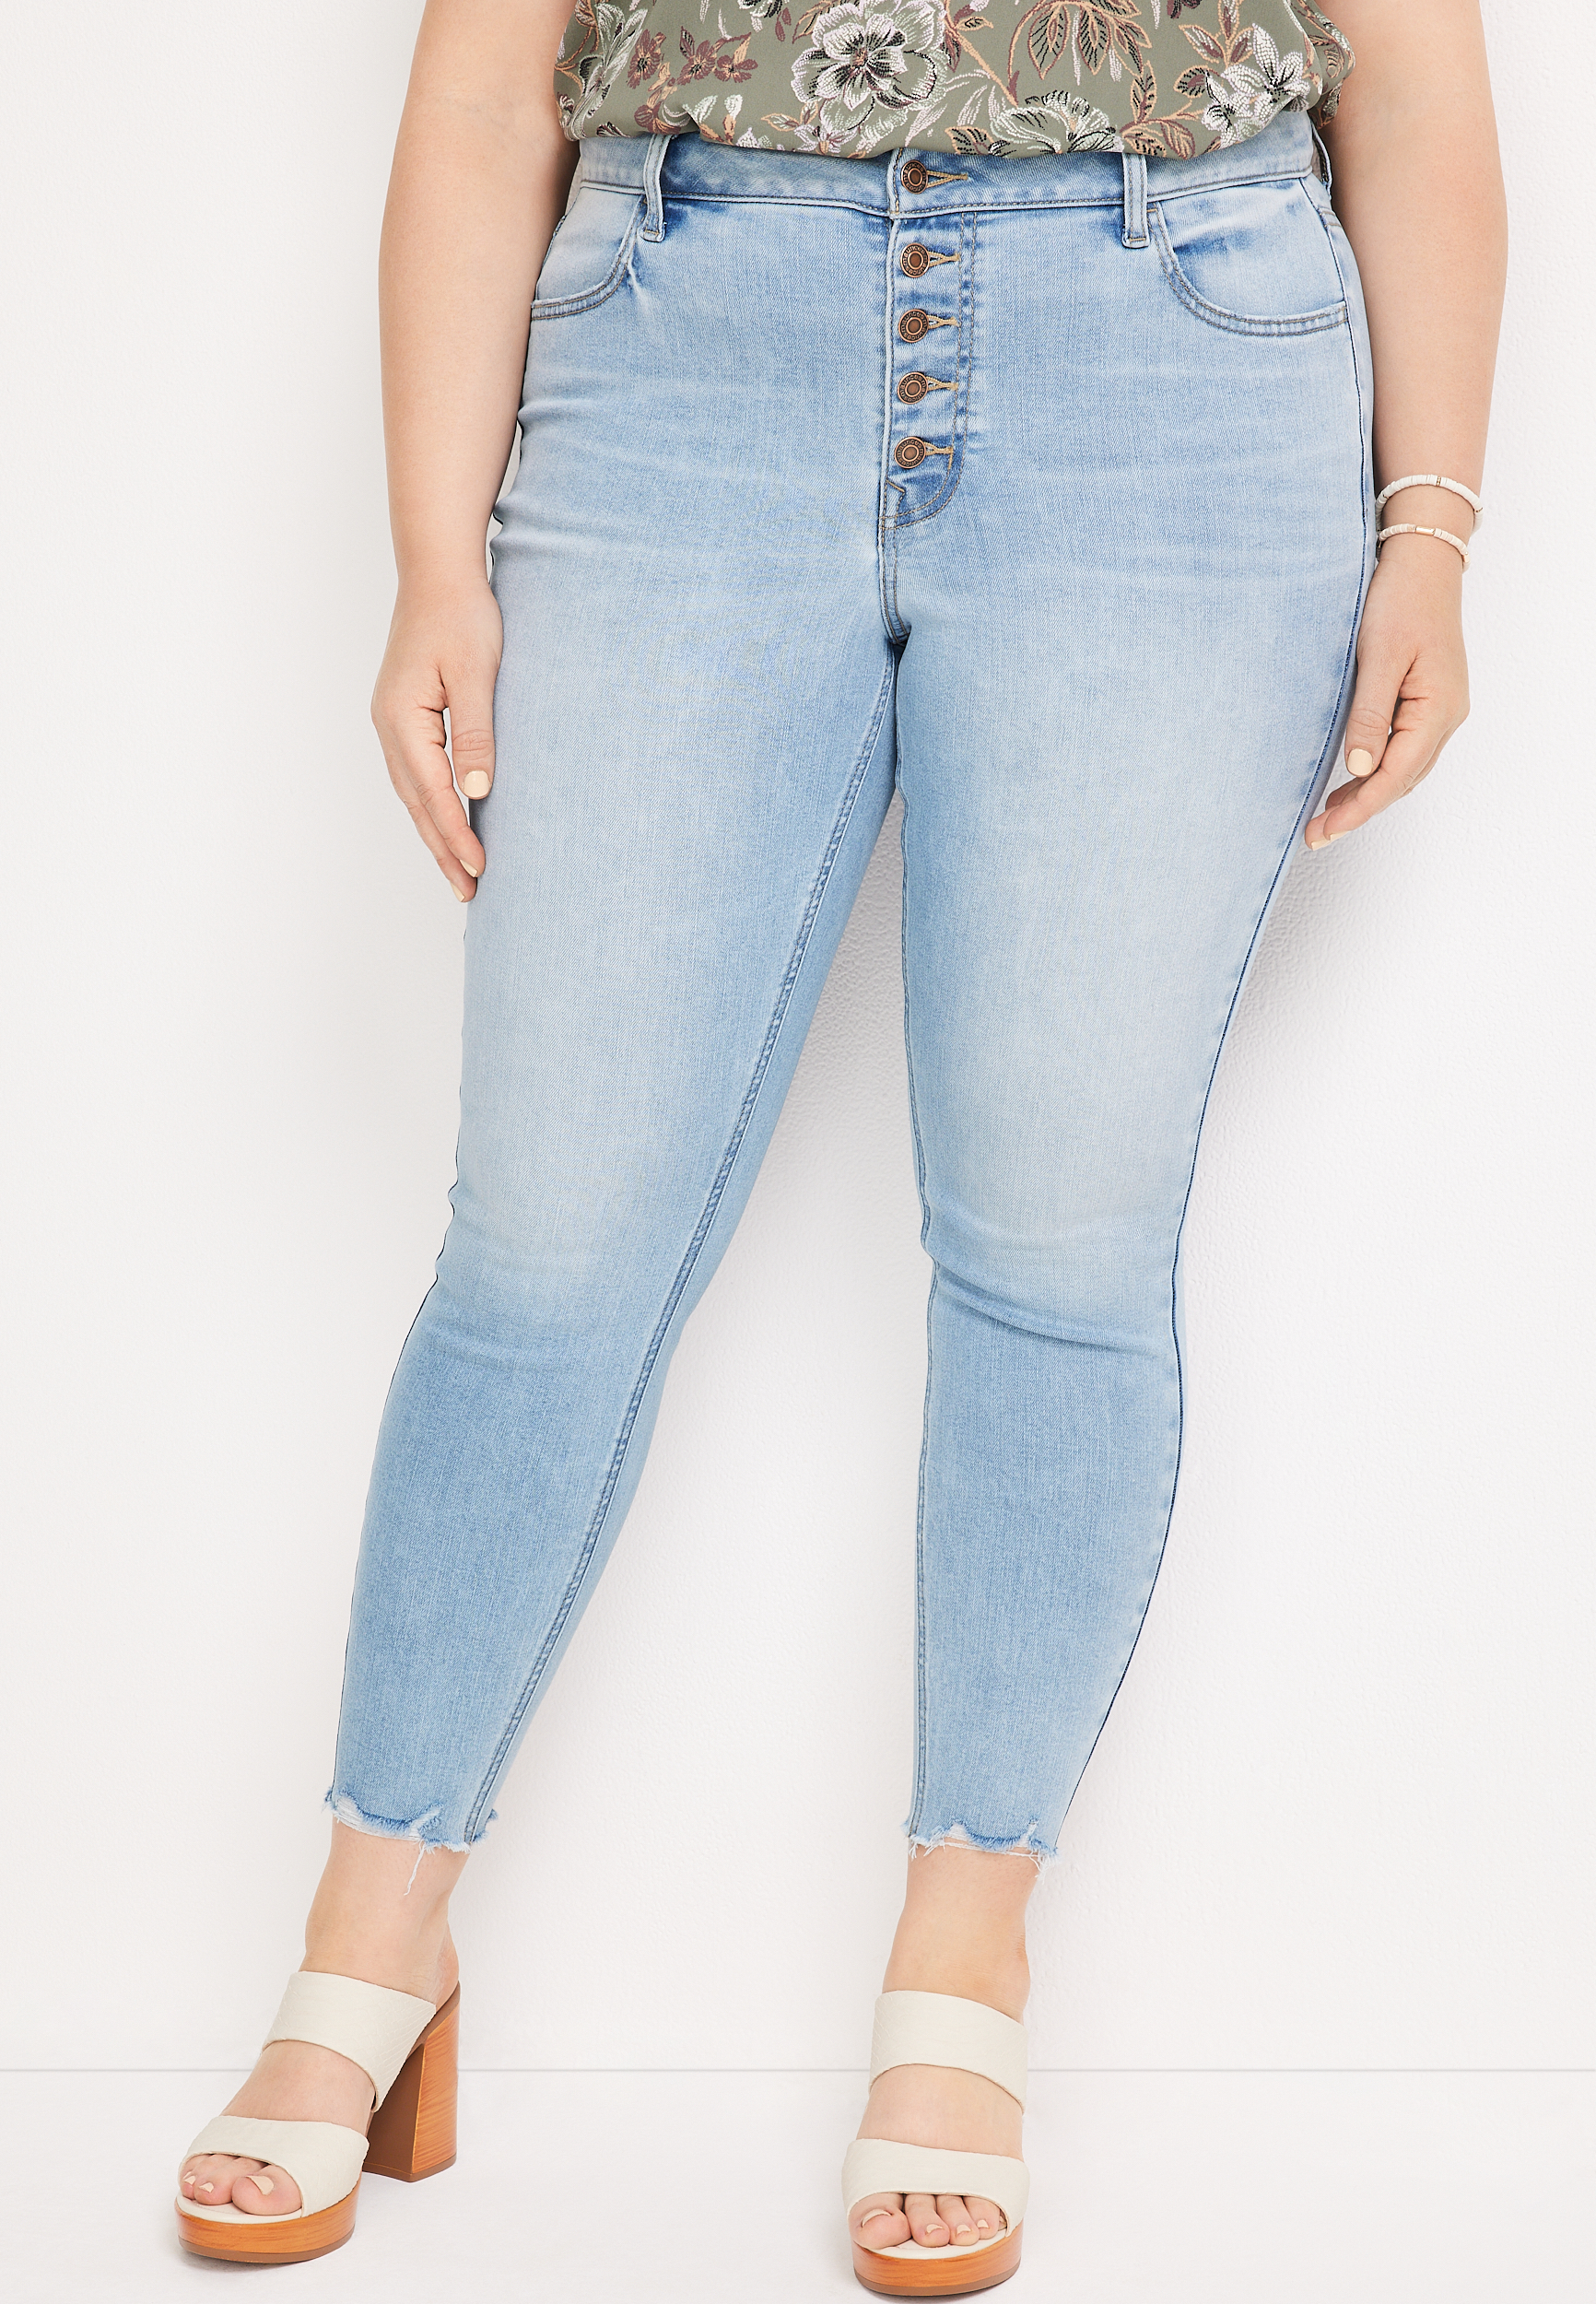 m jeans by maurices™ Cool Comfort Curvy High Rise Super Skinny Jean